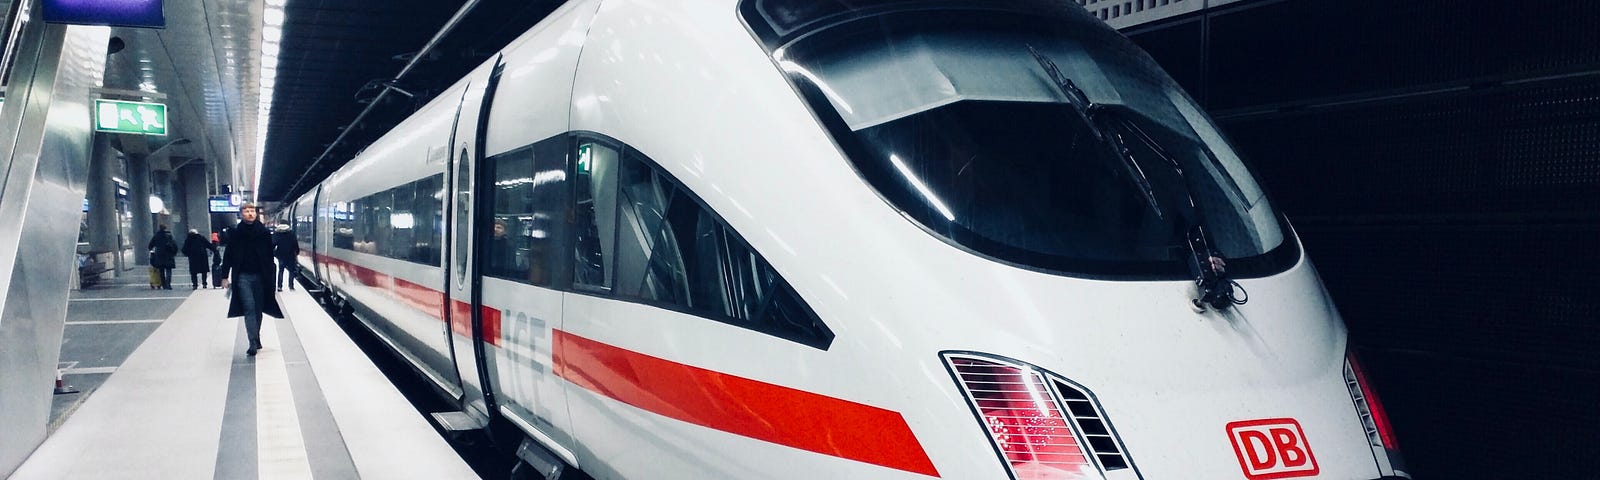 A sleek train stopped at an underground train station in Berlin, Germany.